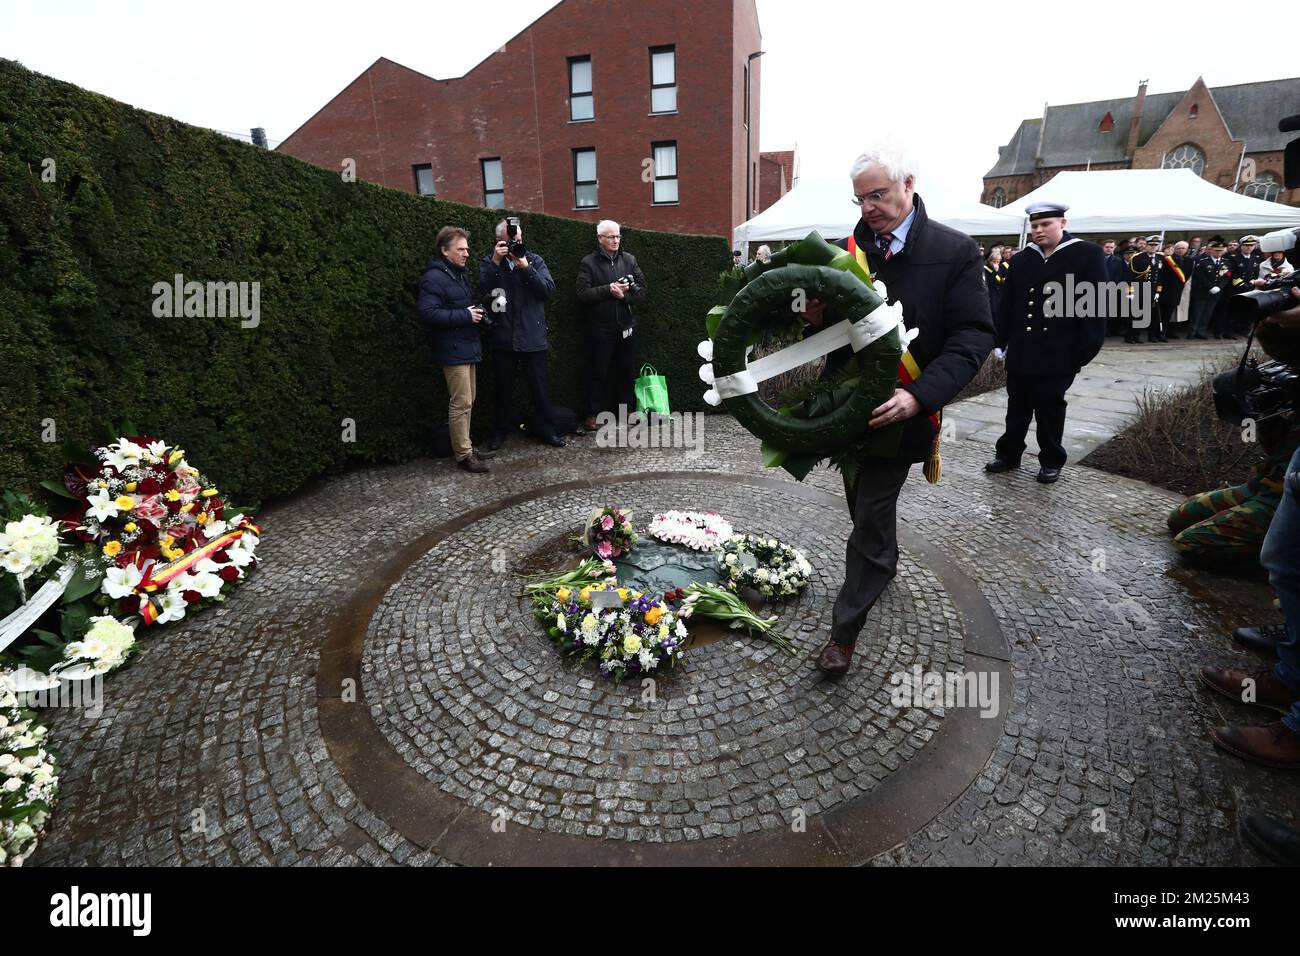 West-Flanders province governor Carl Decaluwe displays a wreath (flowers) at a tribute ceremony for the 30th anniversary of the Herald of Free Enterprise ferry disaster, on Monday 06 March 2017 in Zeebrugge. On 6 March 1987 the ferry left the harbor of Zeebrugge, bound for Dover with more than 450 passengers and 80 crew members on board. It capsized just outside the harbor. The disaster, which was caused by the failure to close the bow doors, cost the life of 194 people. BELGA PHOTO KURT DESPLENTER  Stock Photo